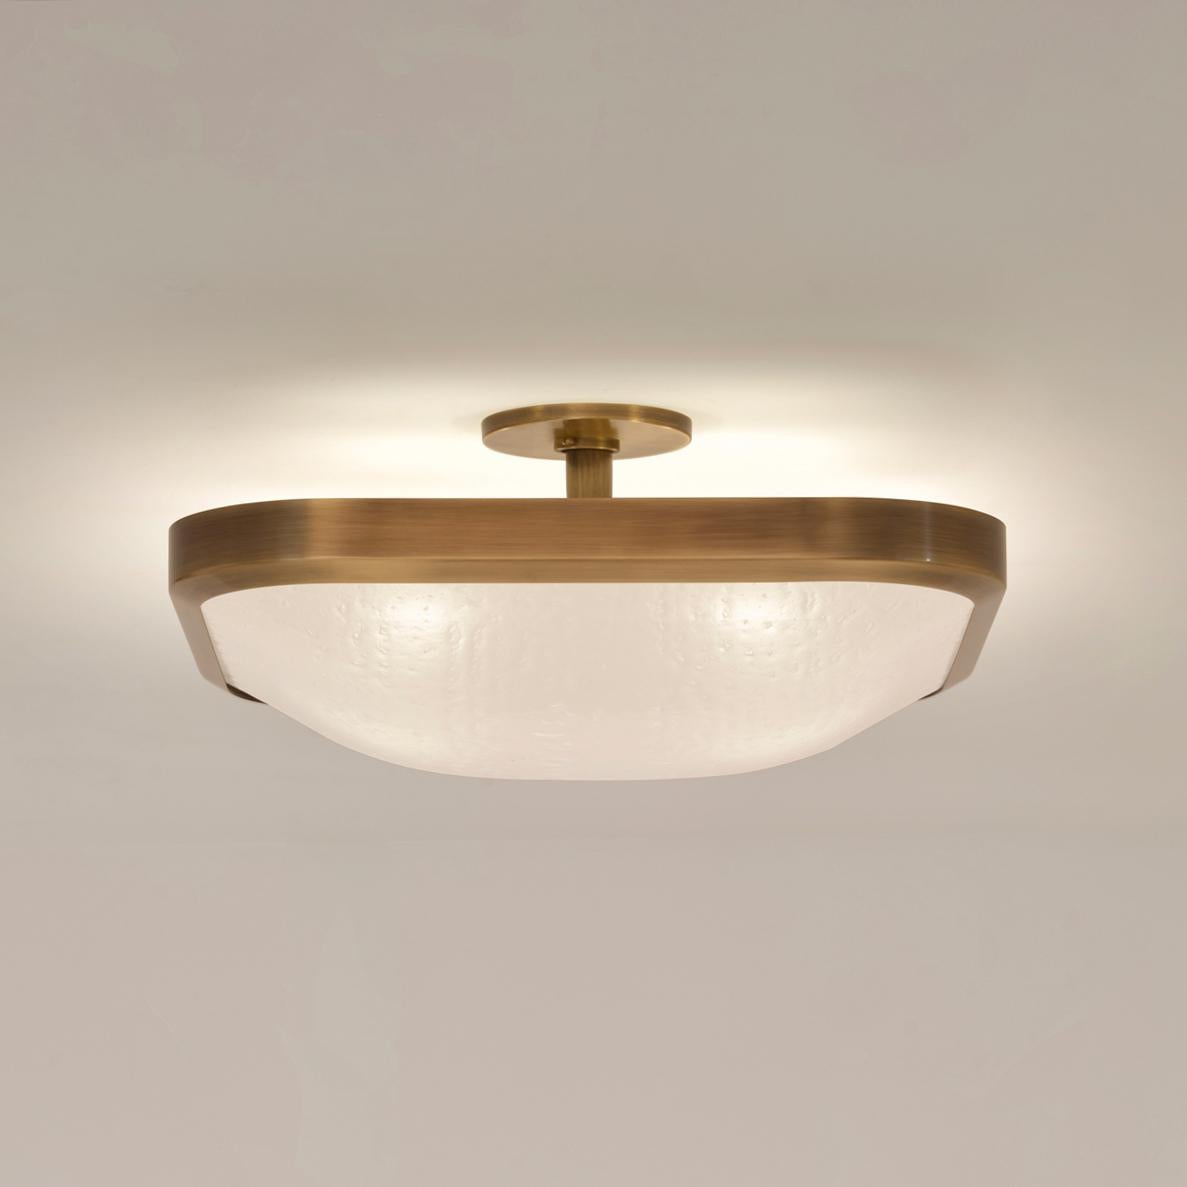 Italian Uno Square Ceiling Light by Gaspare Asaro-Polished Brass Finish For Sale